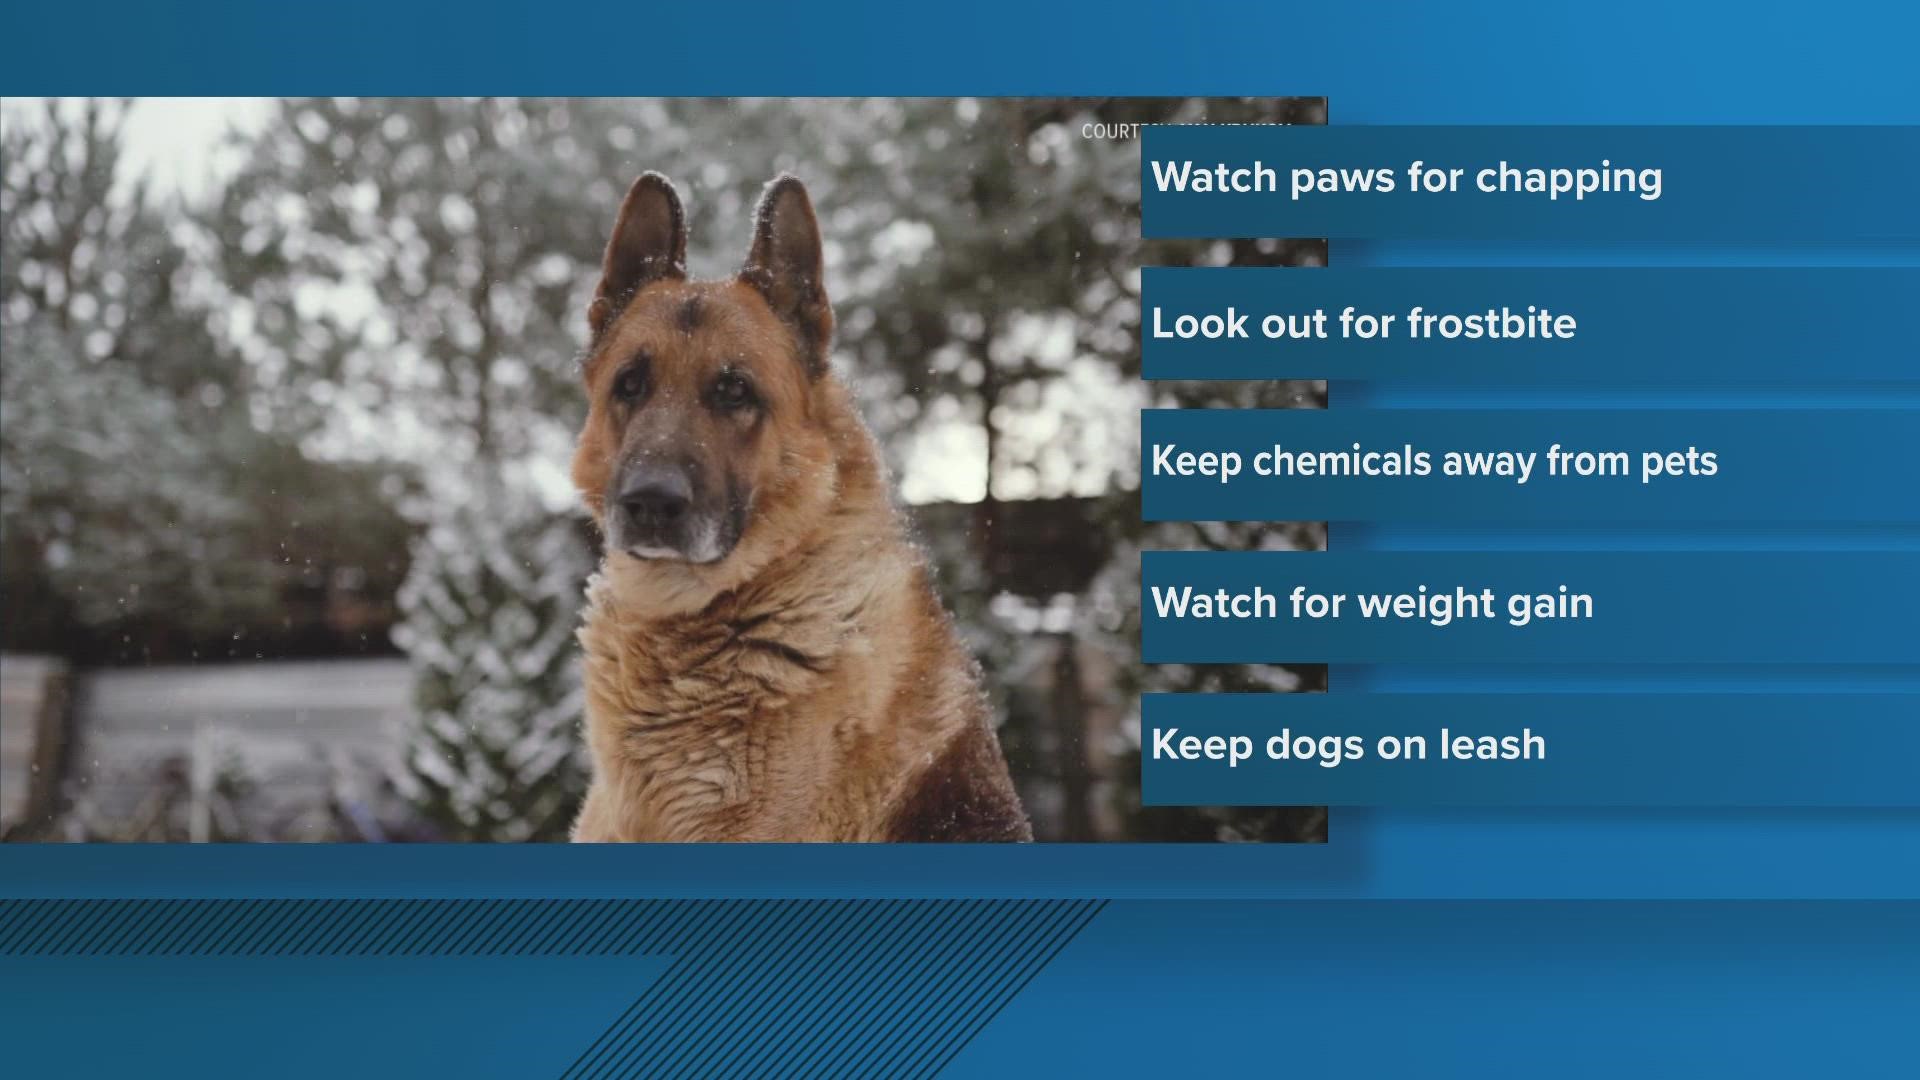 With all the snow and cold, here is some advice from experts on keeping your pets safe during the wintertime.